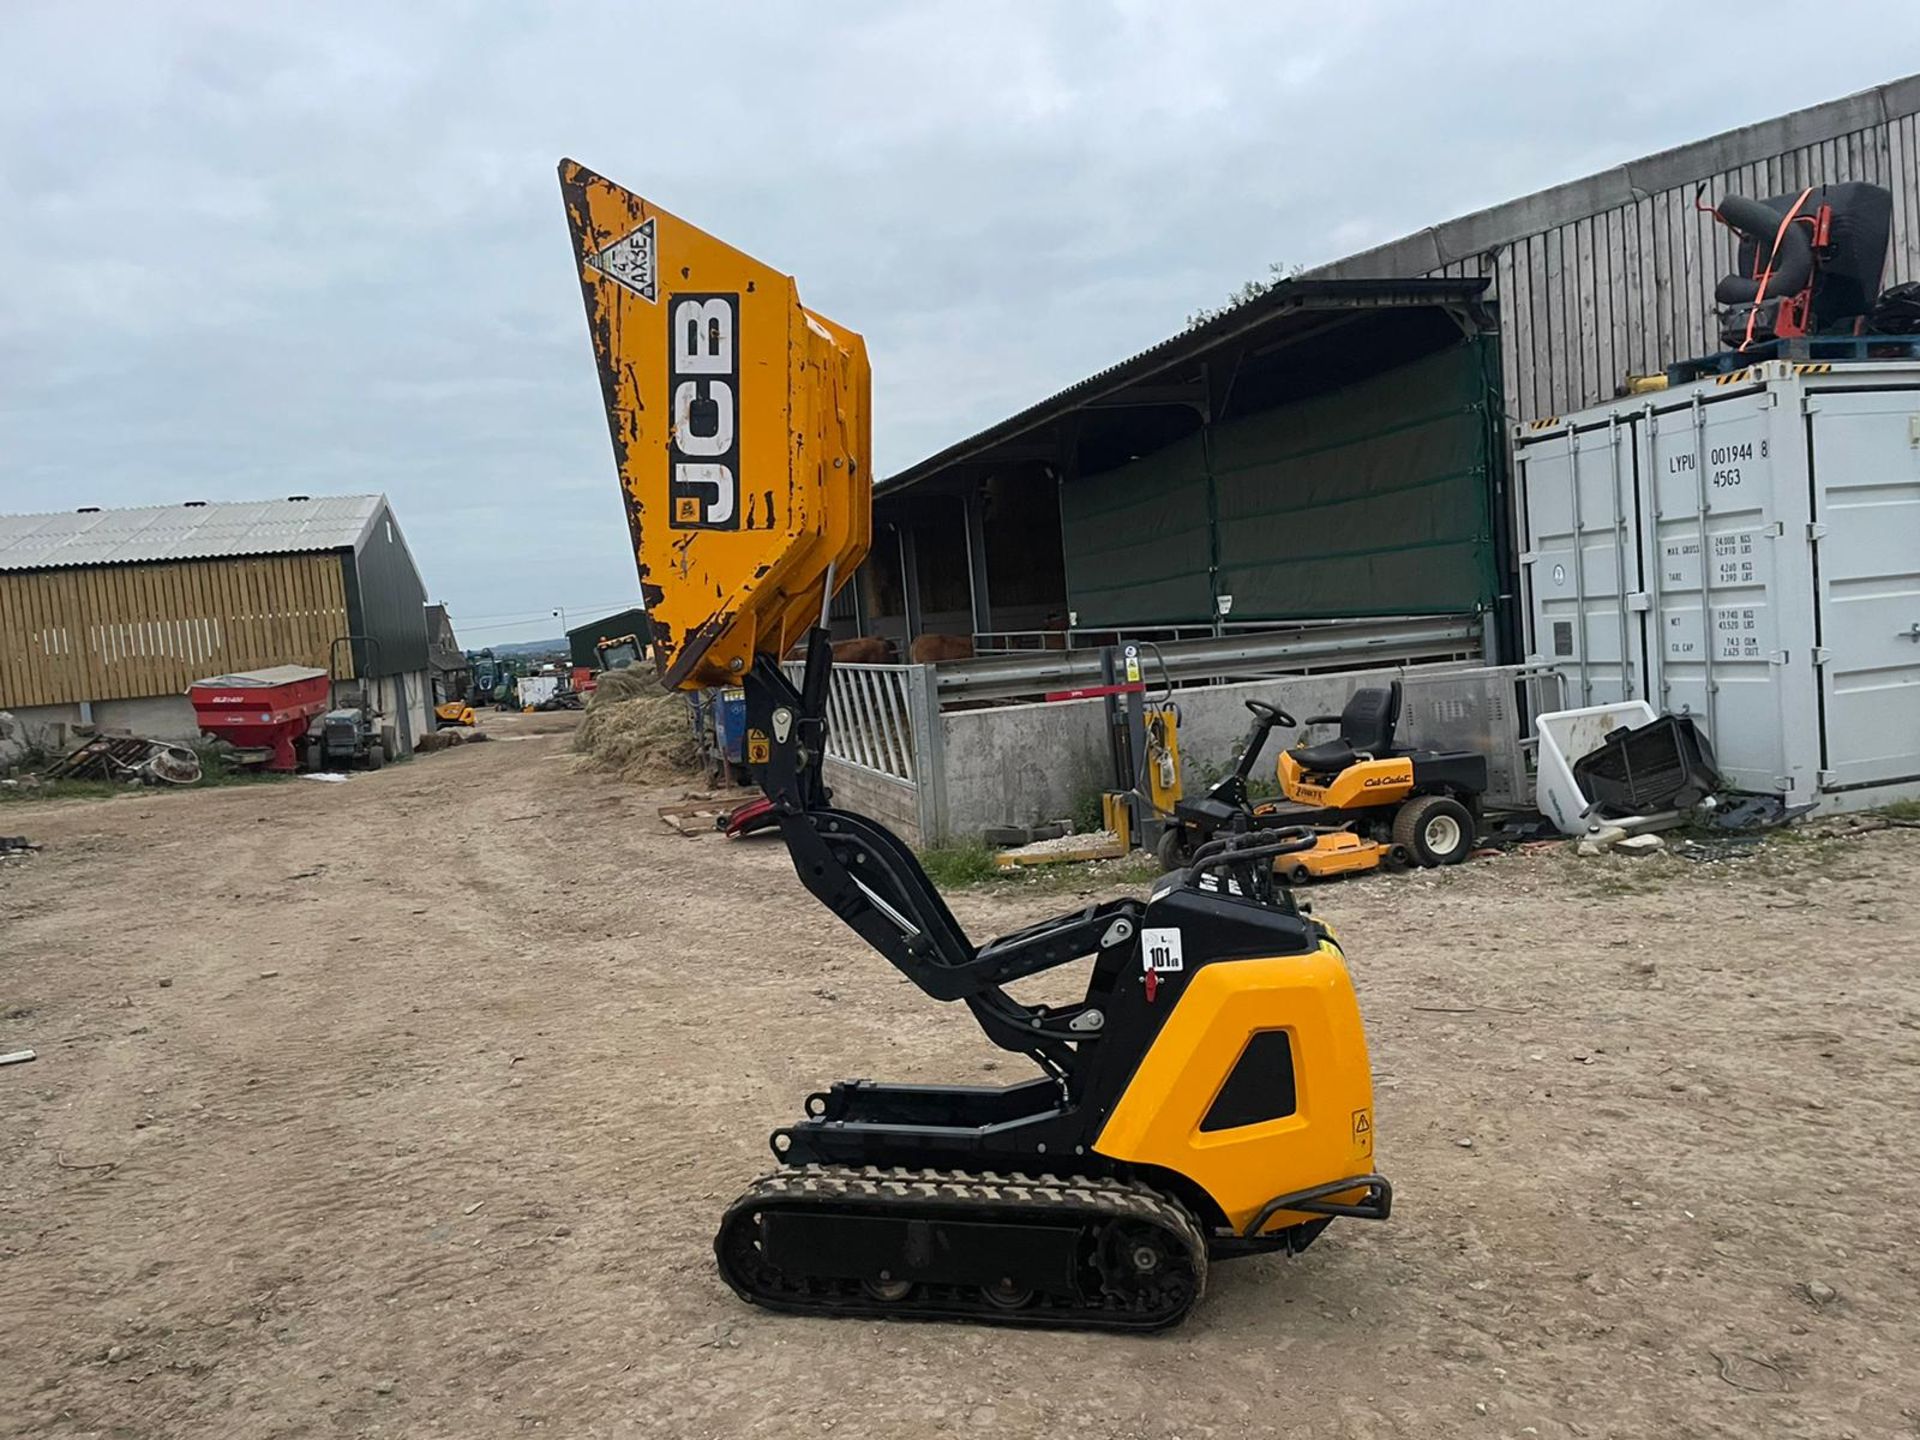 2019 JCB HTD-5 DIESEL TRACKED DUMPER, RUNS DRIVES AND DUMPS, 2 SPEED TRACKING, ELECTRIC START - Image 5 of 13